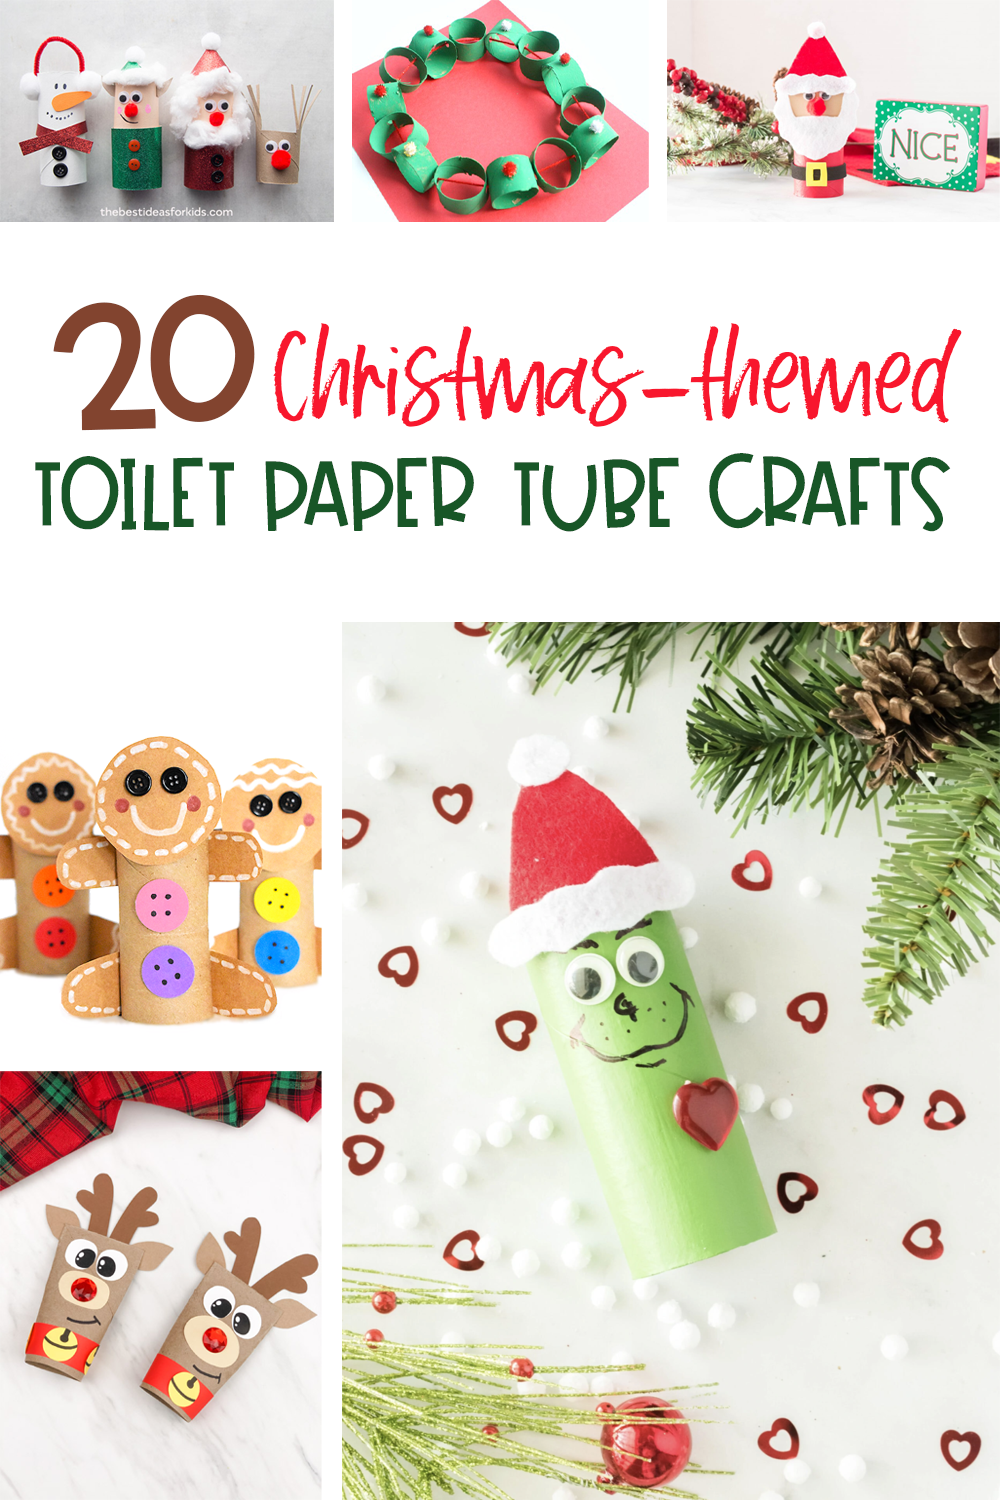 25 Cardboard Tube Crafts for Winter and Christmas - Fantastic Fun